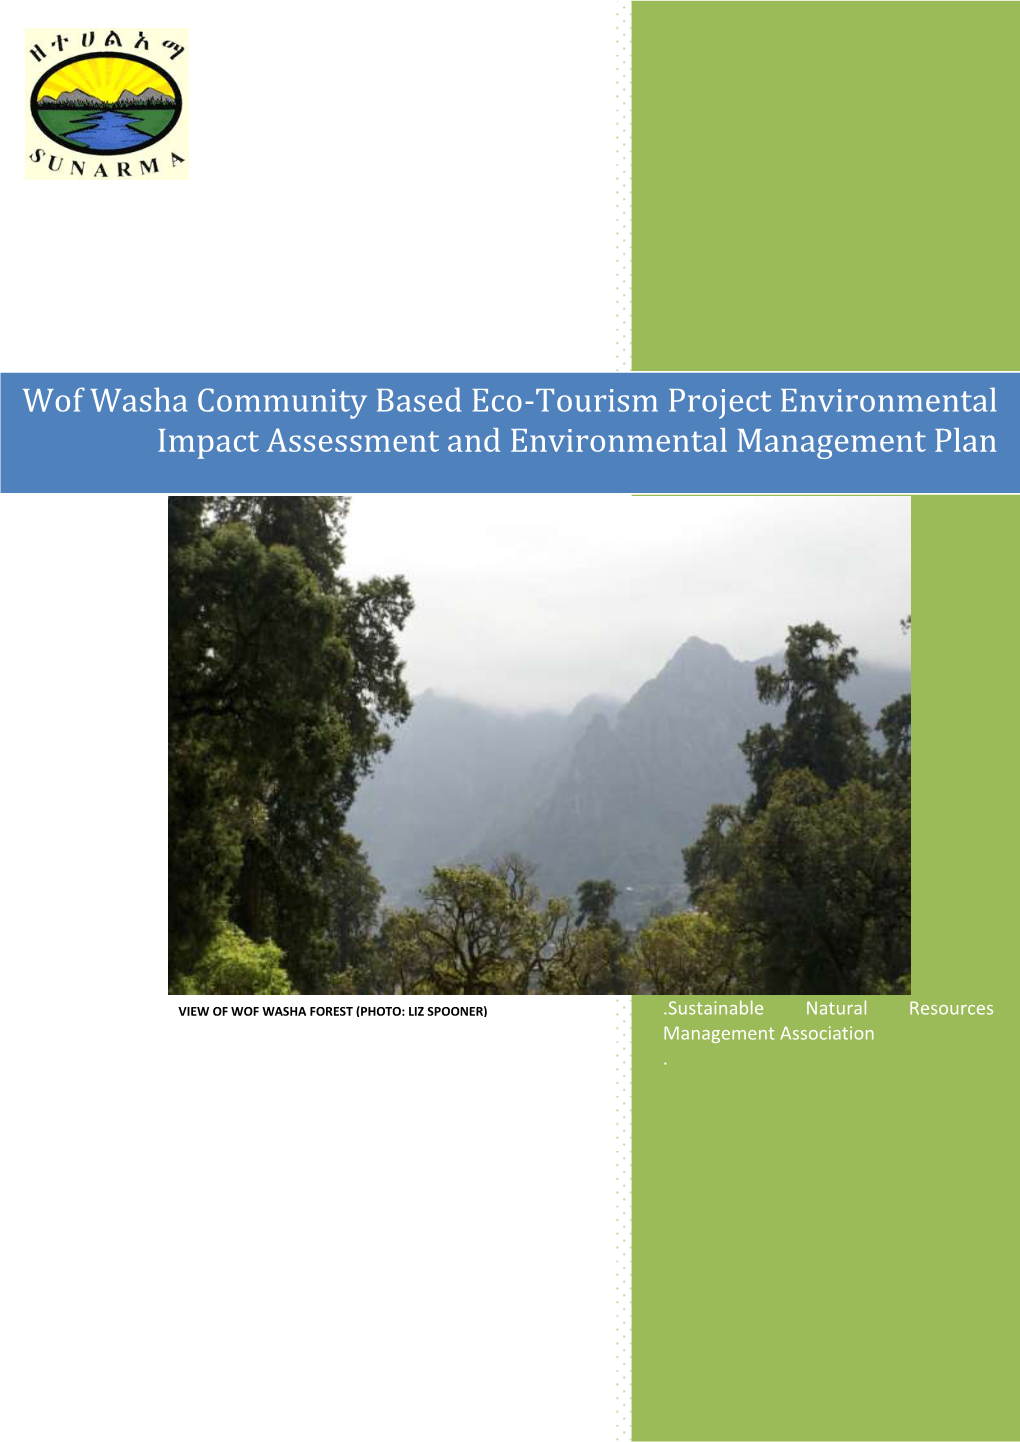 Wof Washa Community Based Eco-Tourism Project Environmental Impact Assessment and Environmental Management Plan